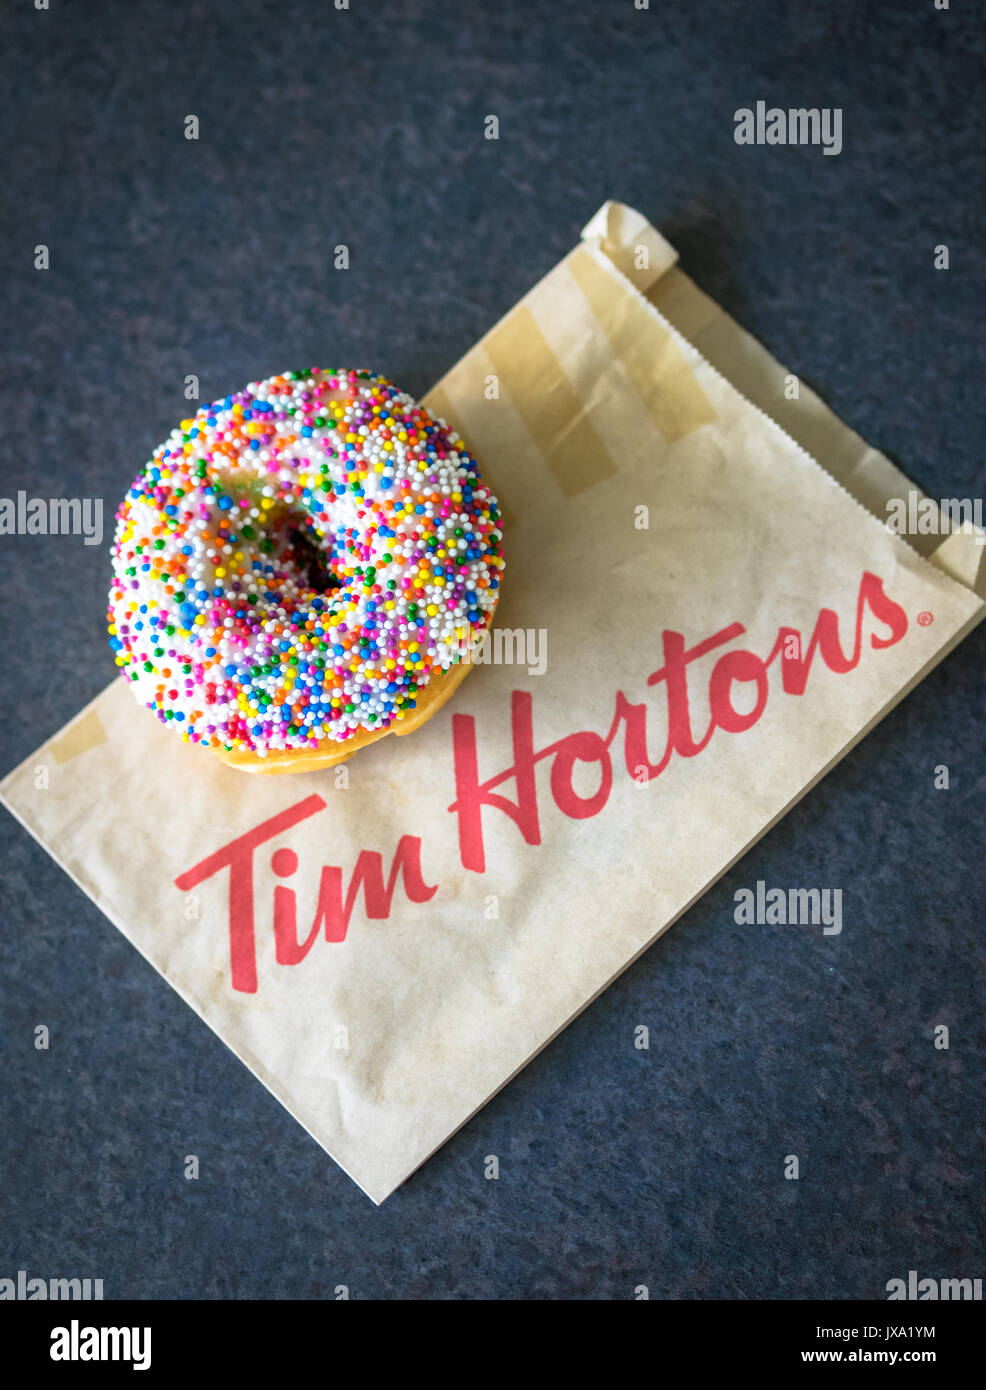 A vanilla dip donut (sprinkle donut, rainbow sprinkle donut) from Tim Hortons, a popular Canadian fast food restaurant and donut shop. Stock Photo